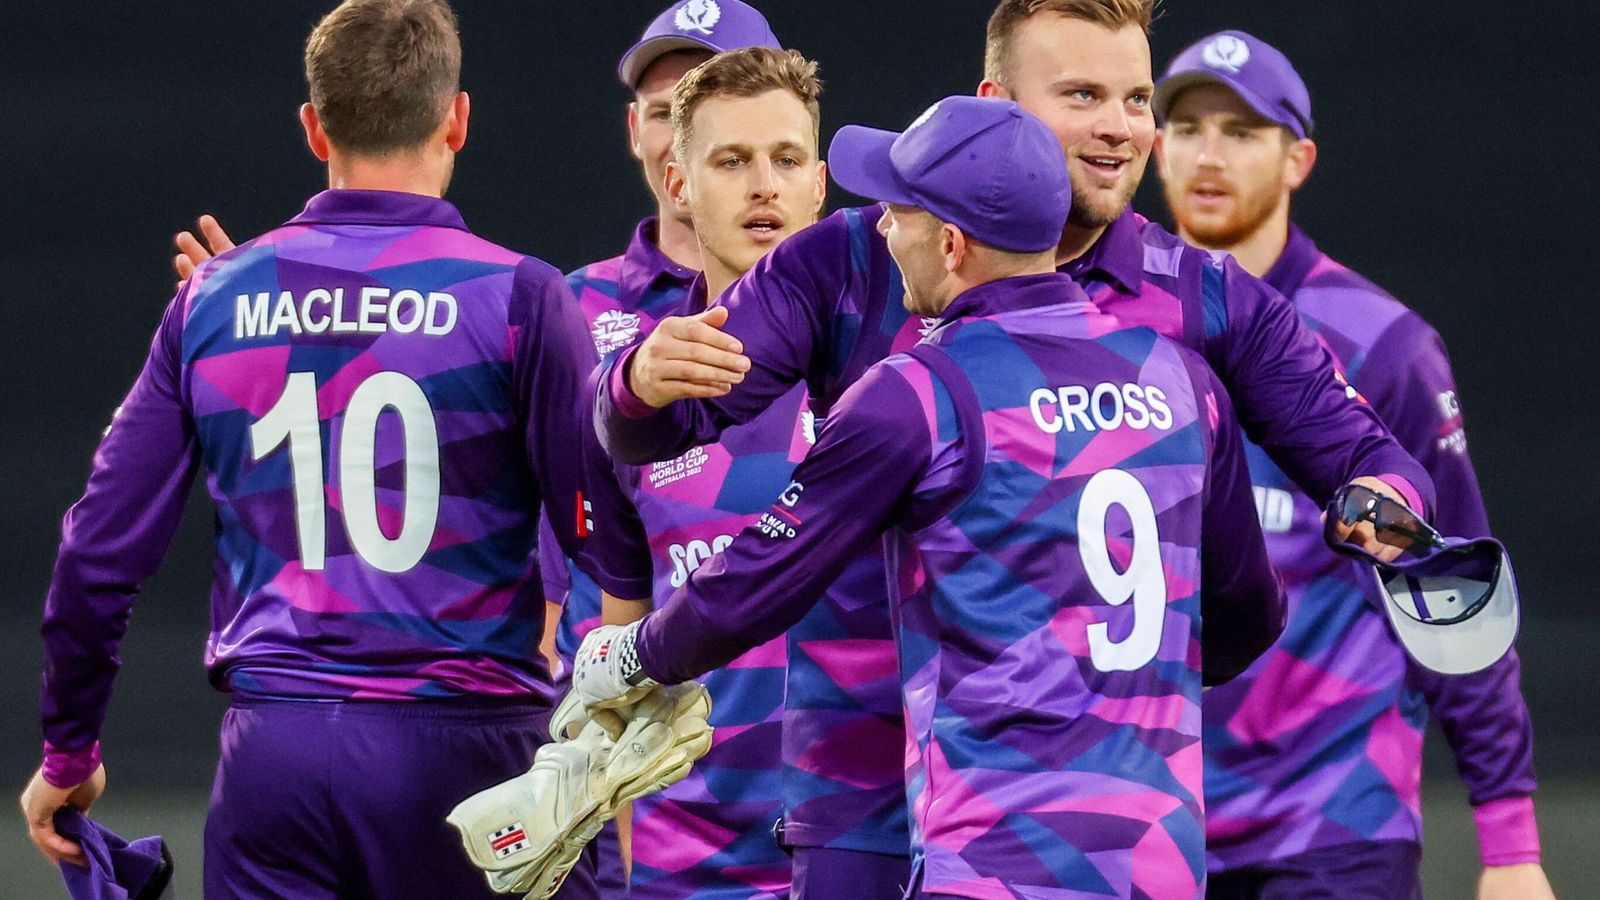  T20 World Cup: Scotland have 'unfinished business', would 'love' a match with England |  Cricket News

